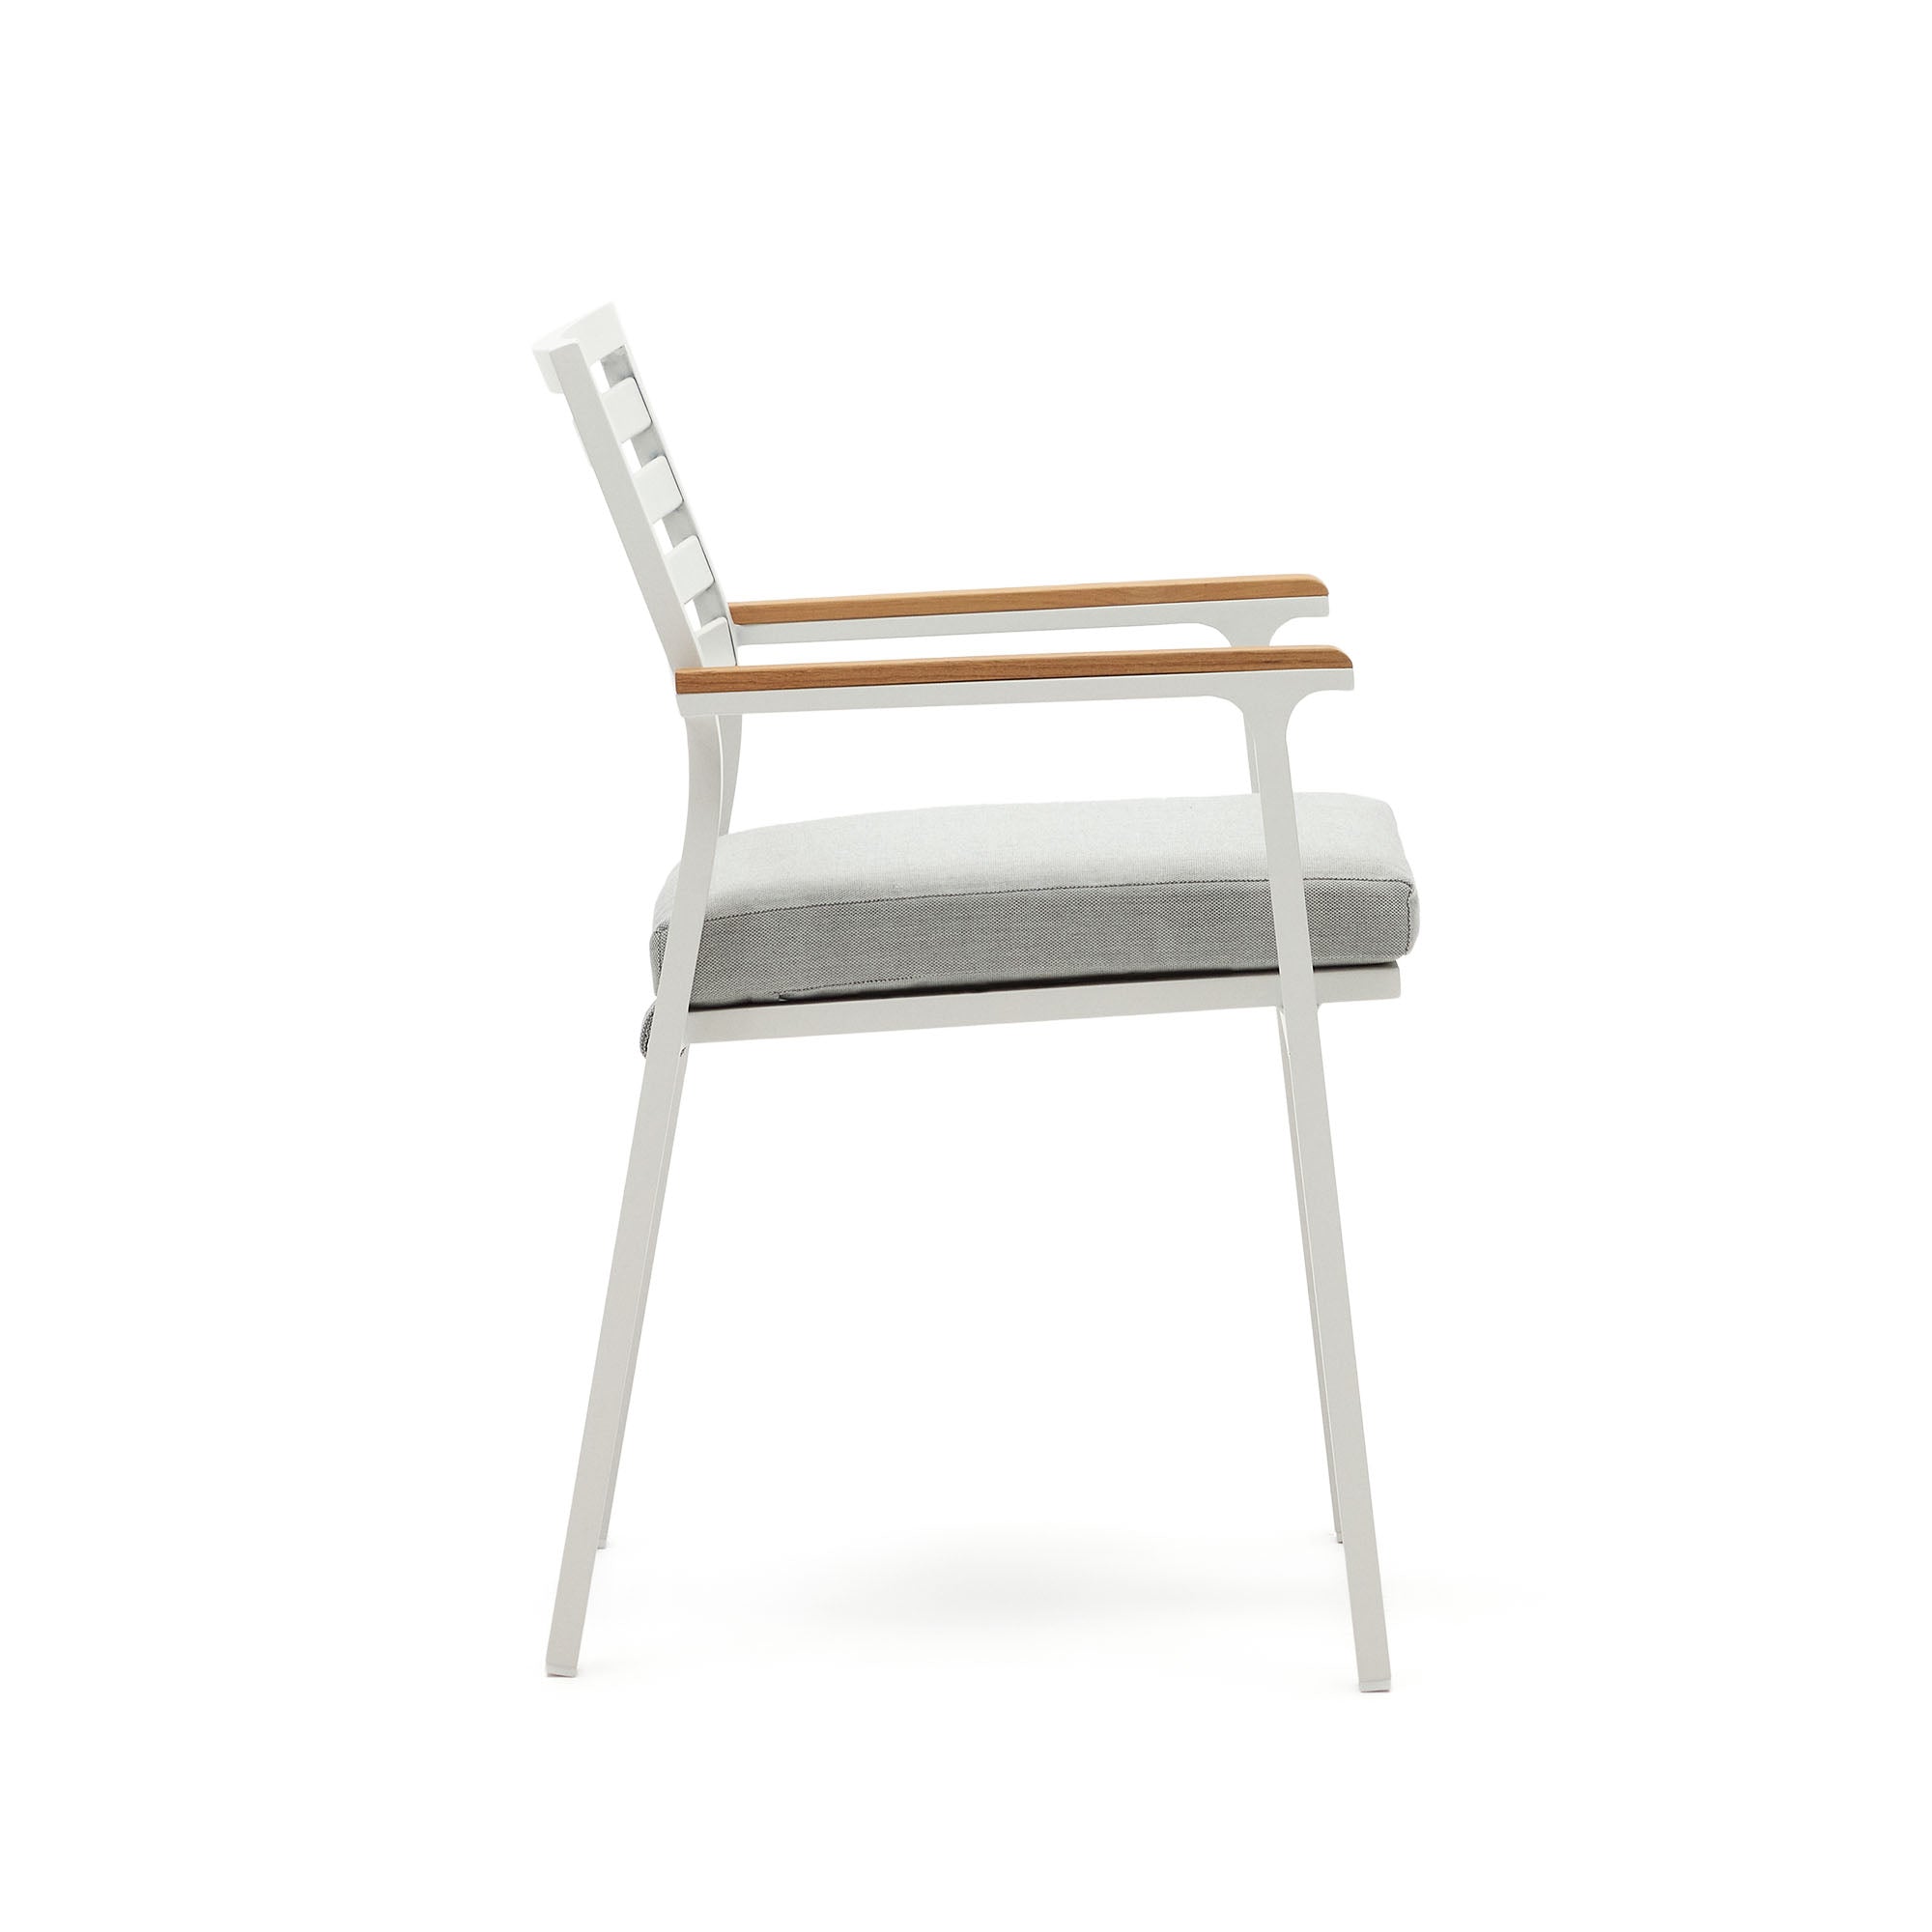 Bona aluminium stackable garden chair with a white finish and solid teak wood armrests